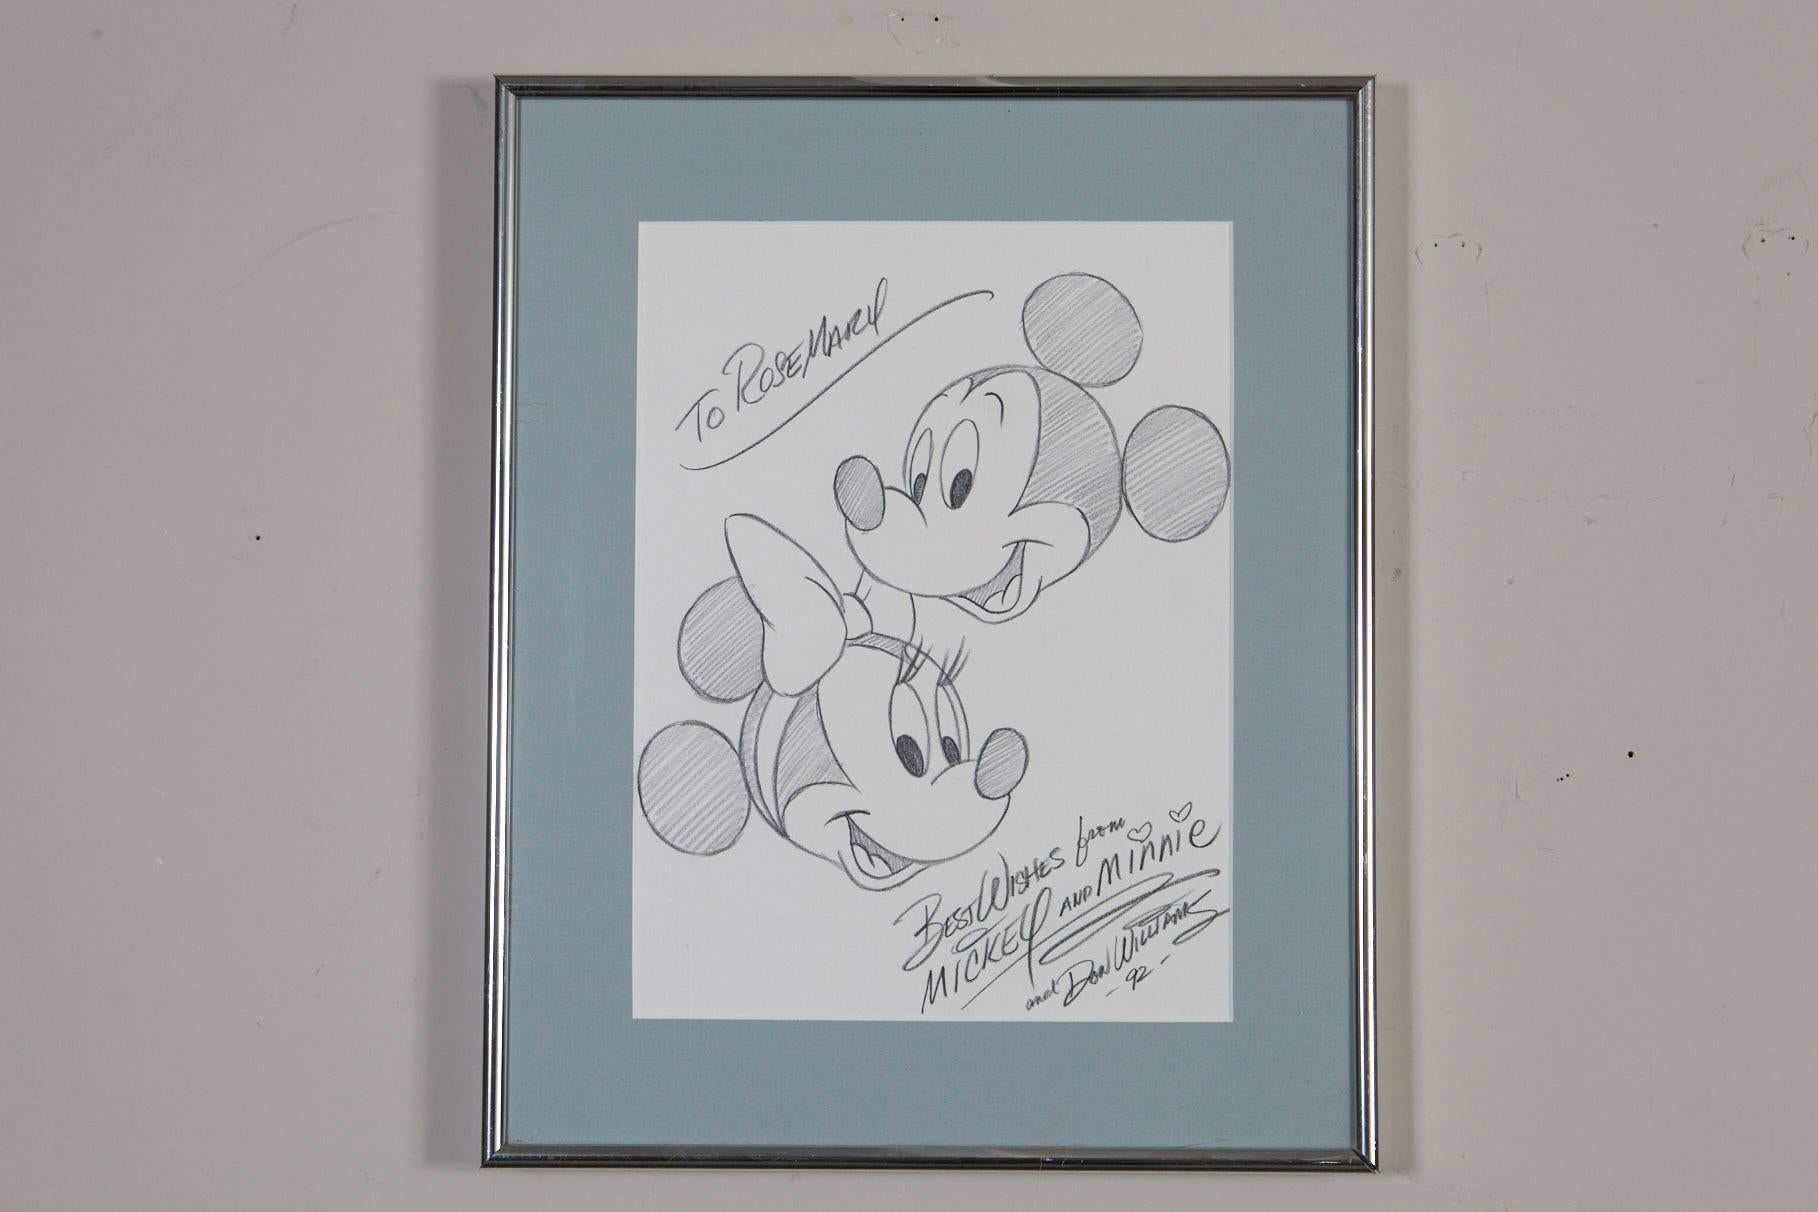 Original line drawing created exclusively by the animator Ron Williams for Rosemary Clooney.
'To Rosemary Best Wishes from Mickey and Minnie and Don Williams -92-'
The framed drawing is from the estate of Rosemary Clooney, which can be